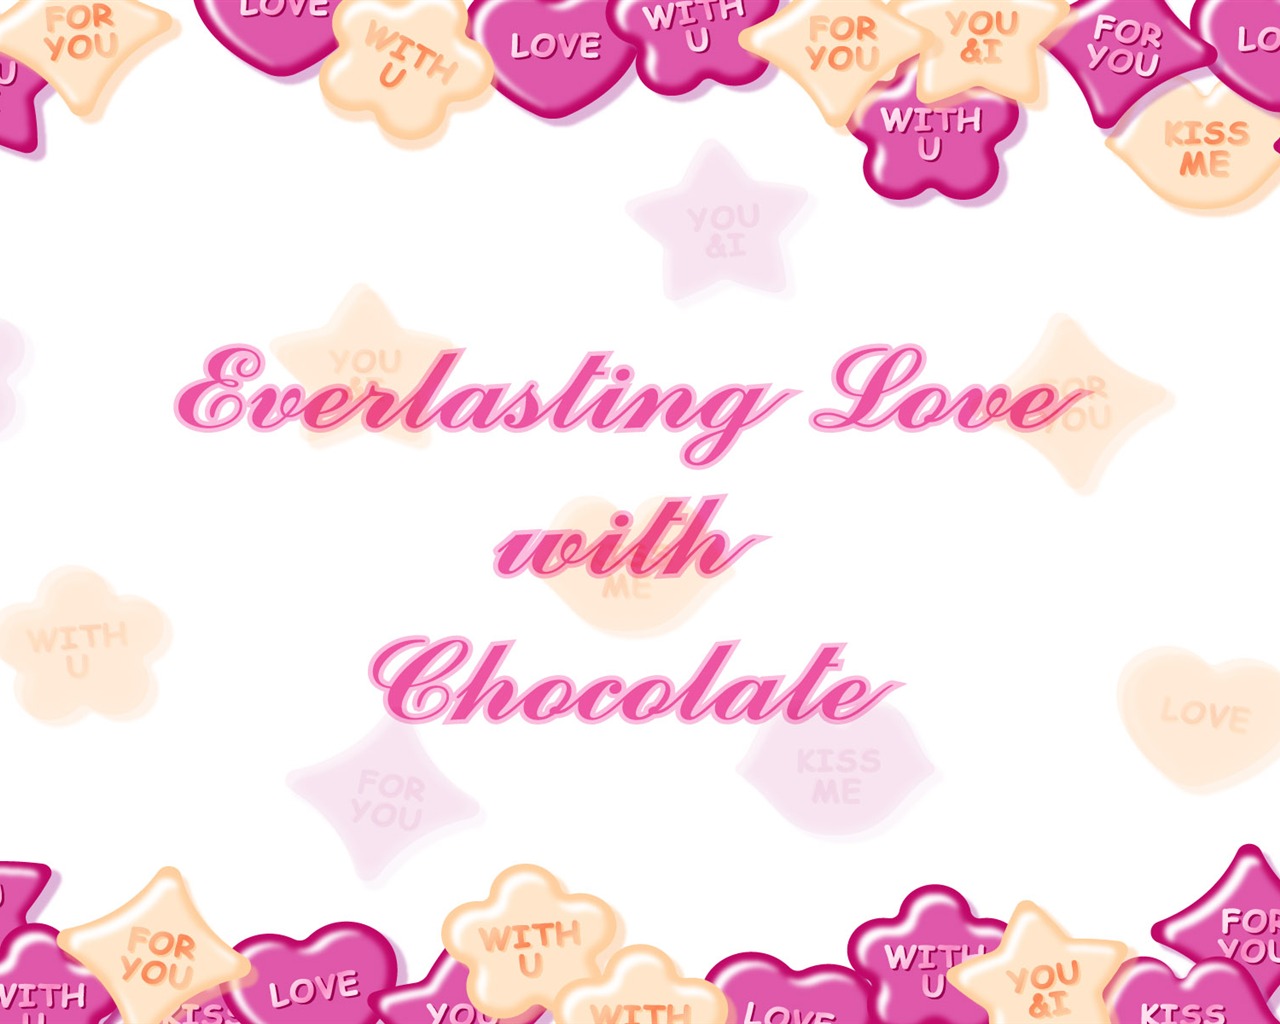 Valentine's Day Theme Wallpapers (1) #11 - 1280x1024